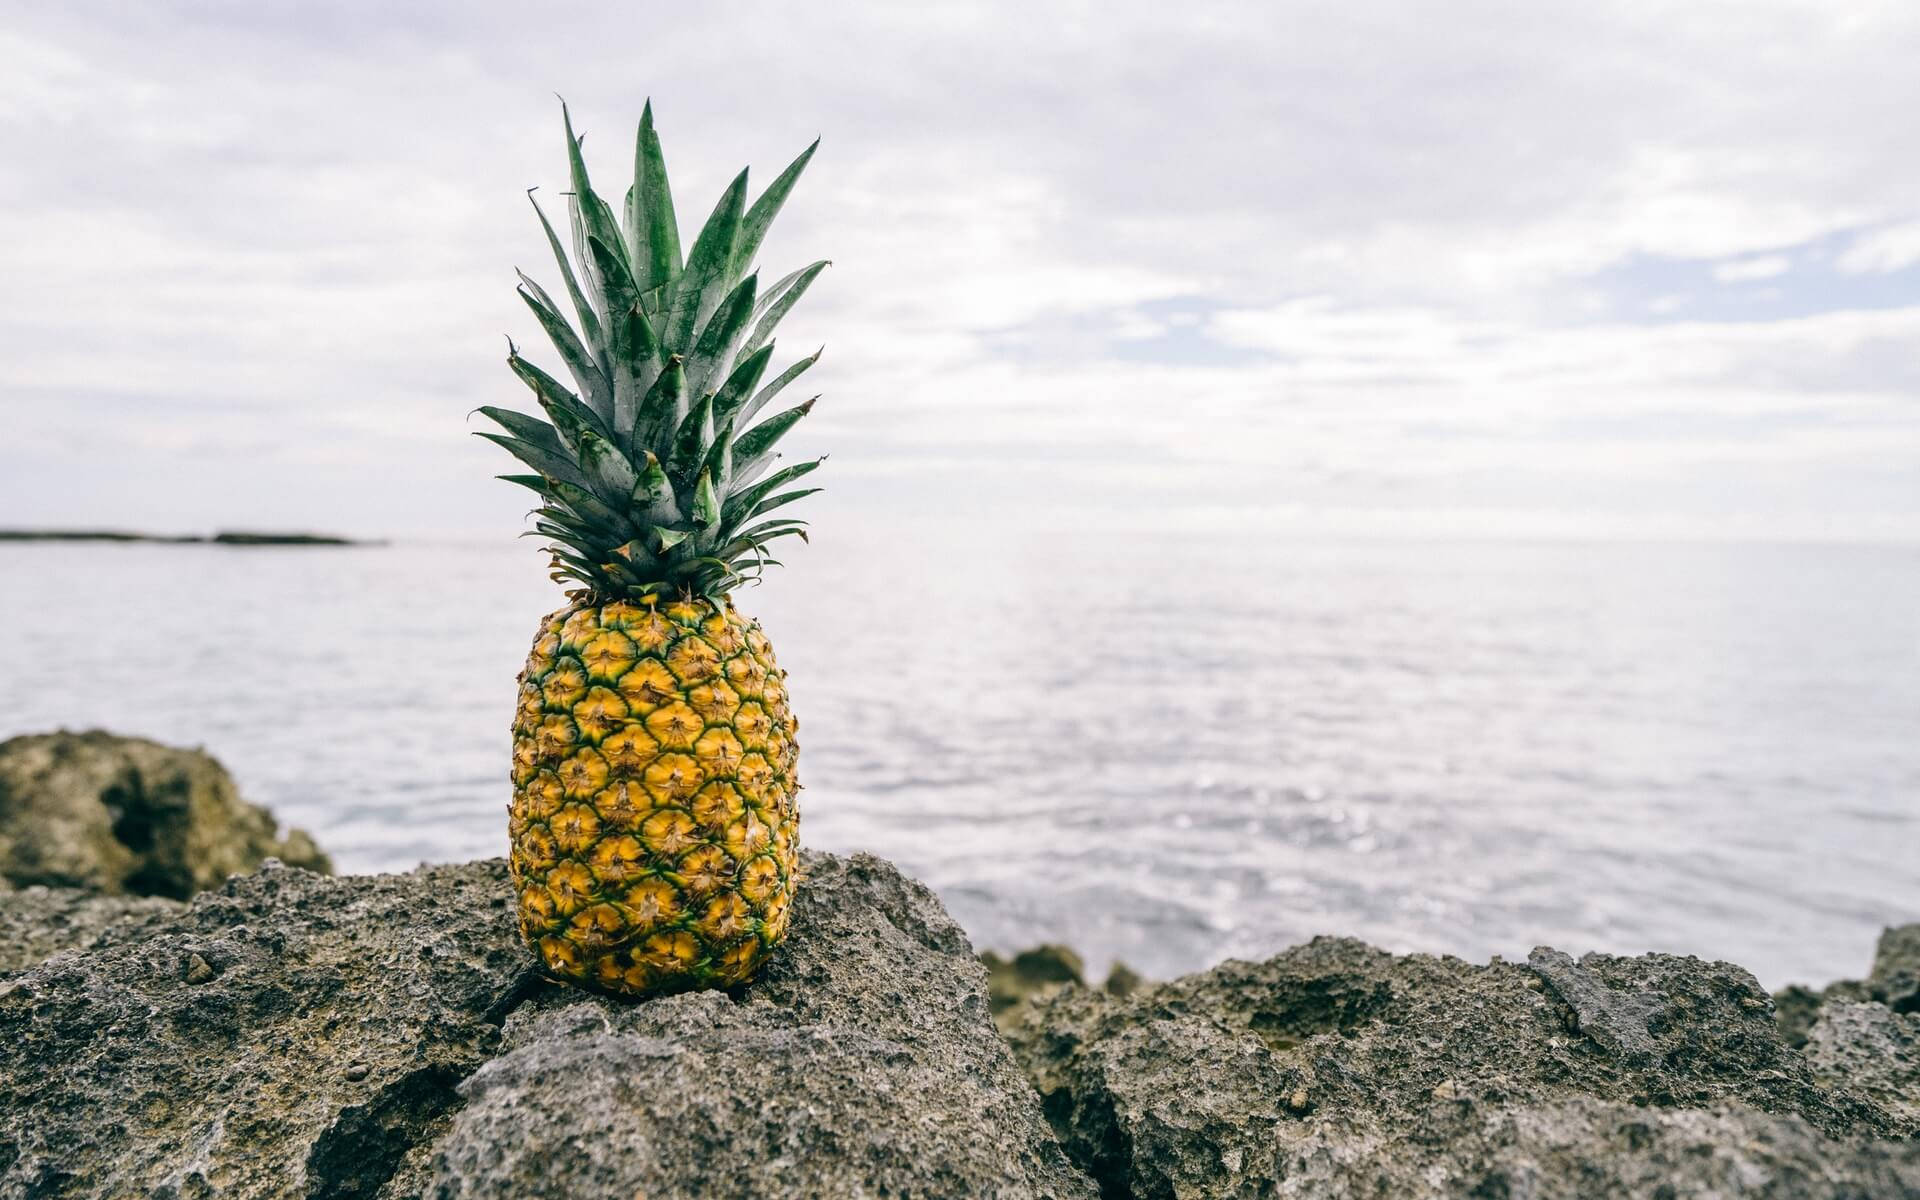 A golden pineapple resting on a rocky shore on a sunny day. Wallpaper